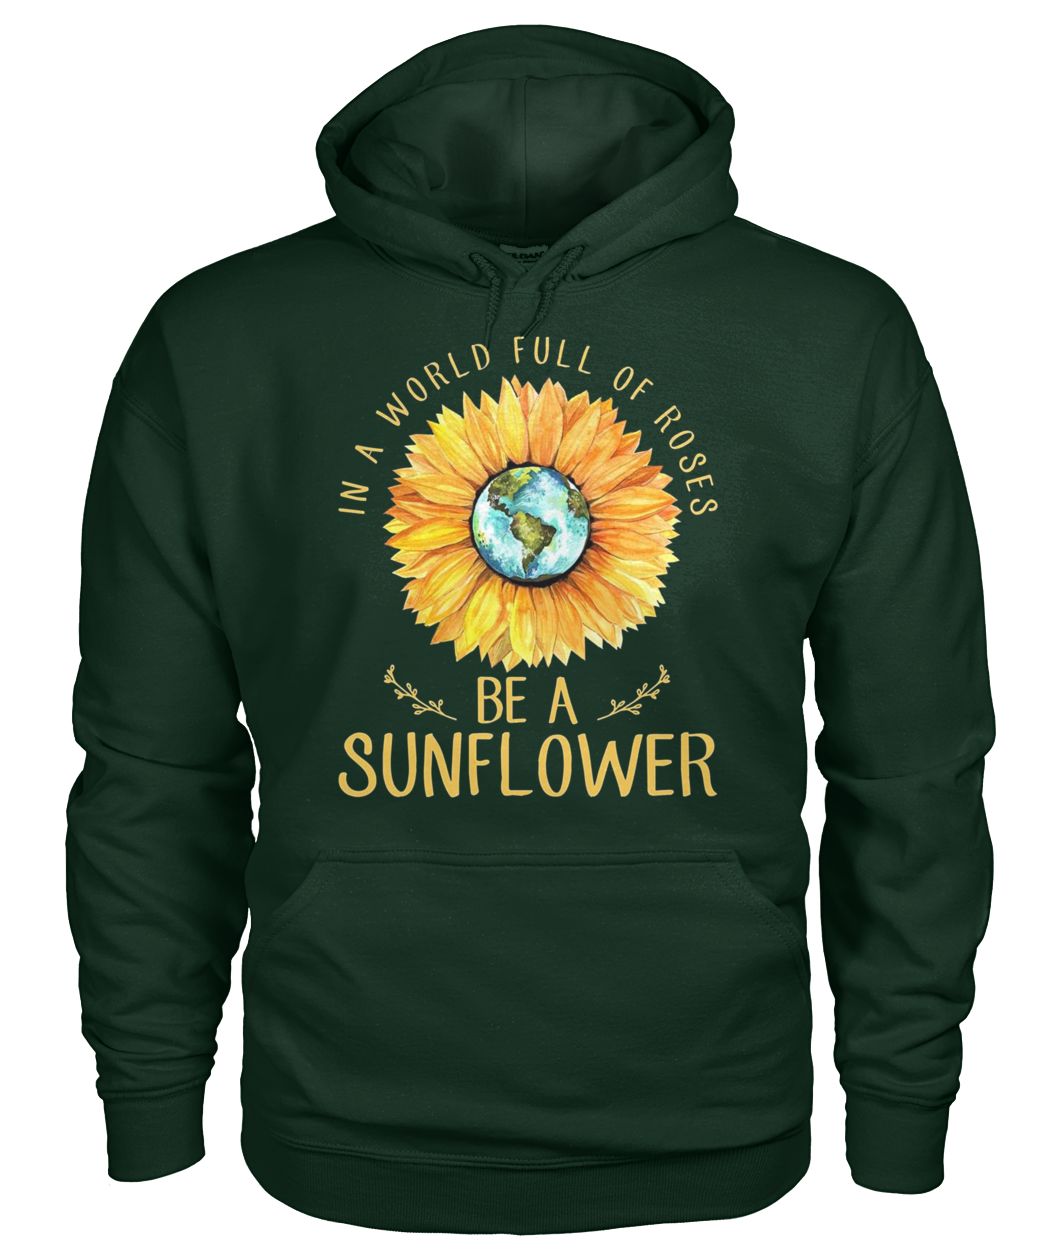 In a world full of roses be a sunflower earth gildan hoodie